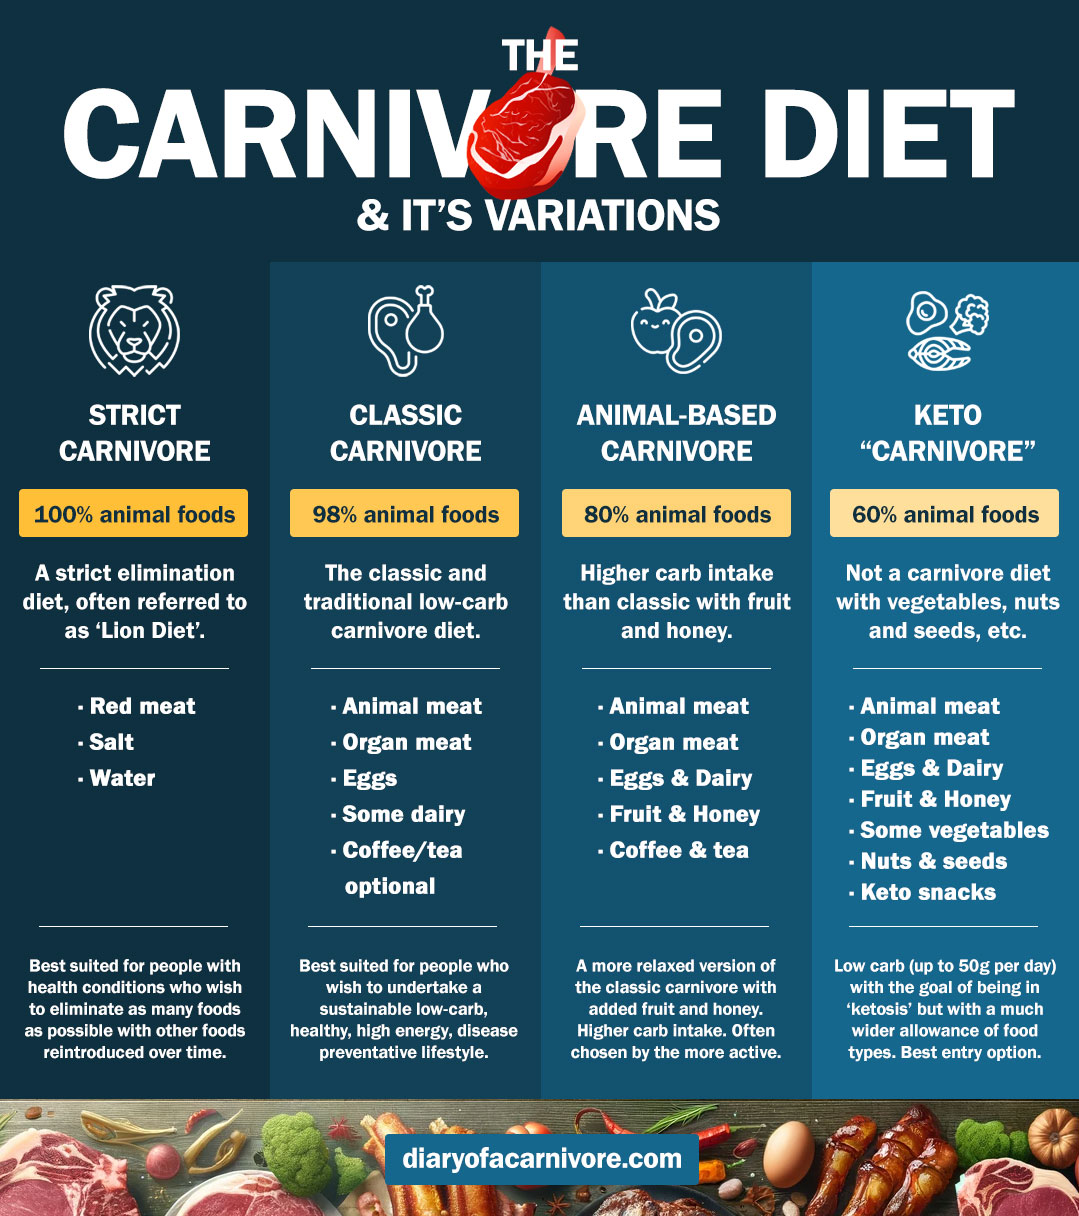 Different types of Carnivore Diet explained